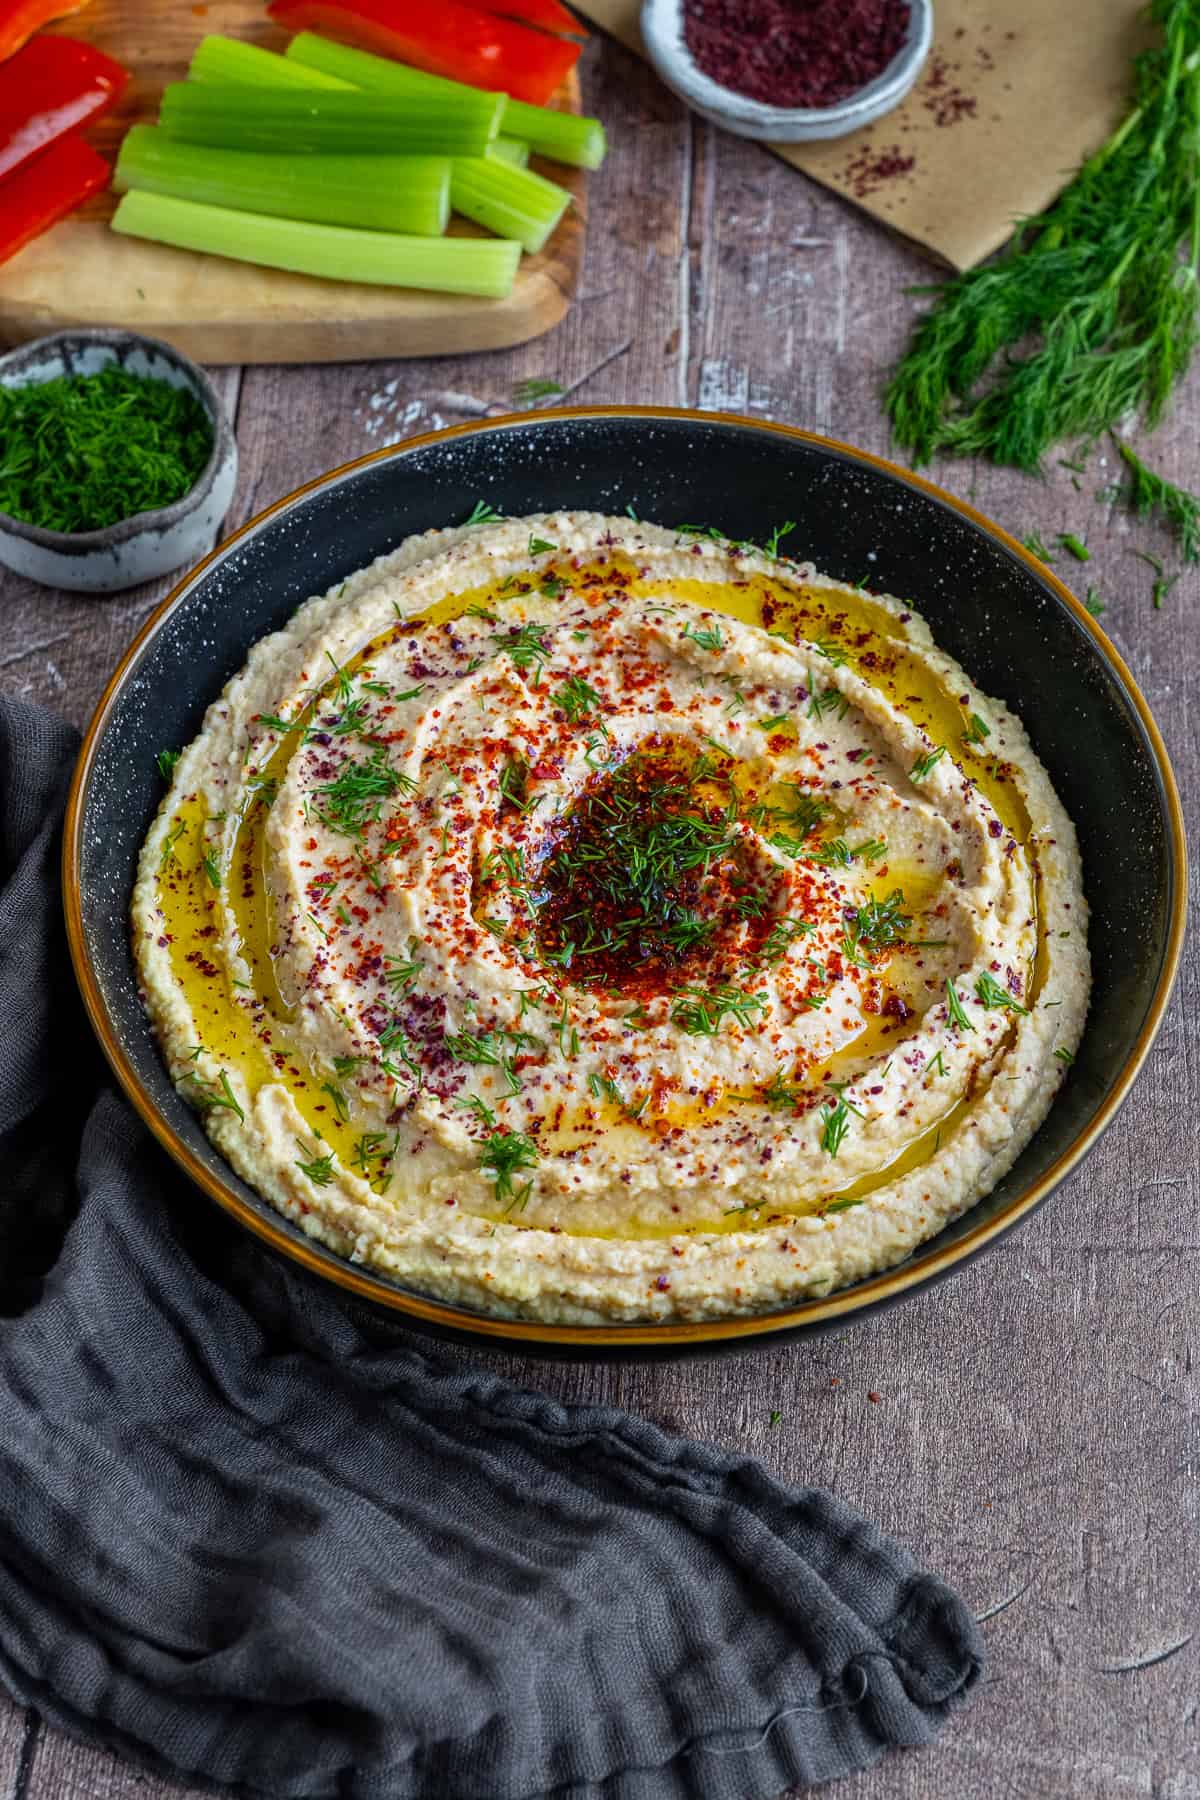 Hummus topped with spices and fresh dill in a black bowl and celery sticks and red bell sticks behind it.